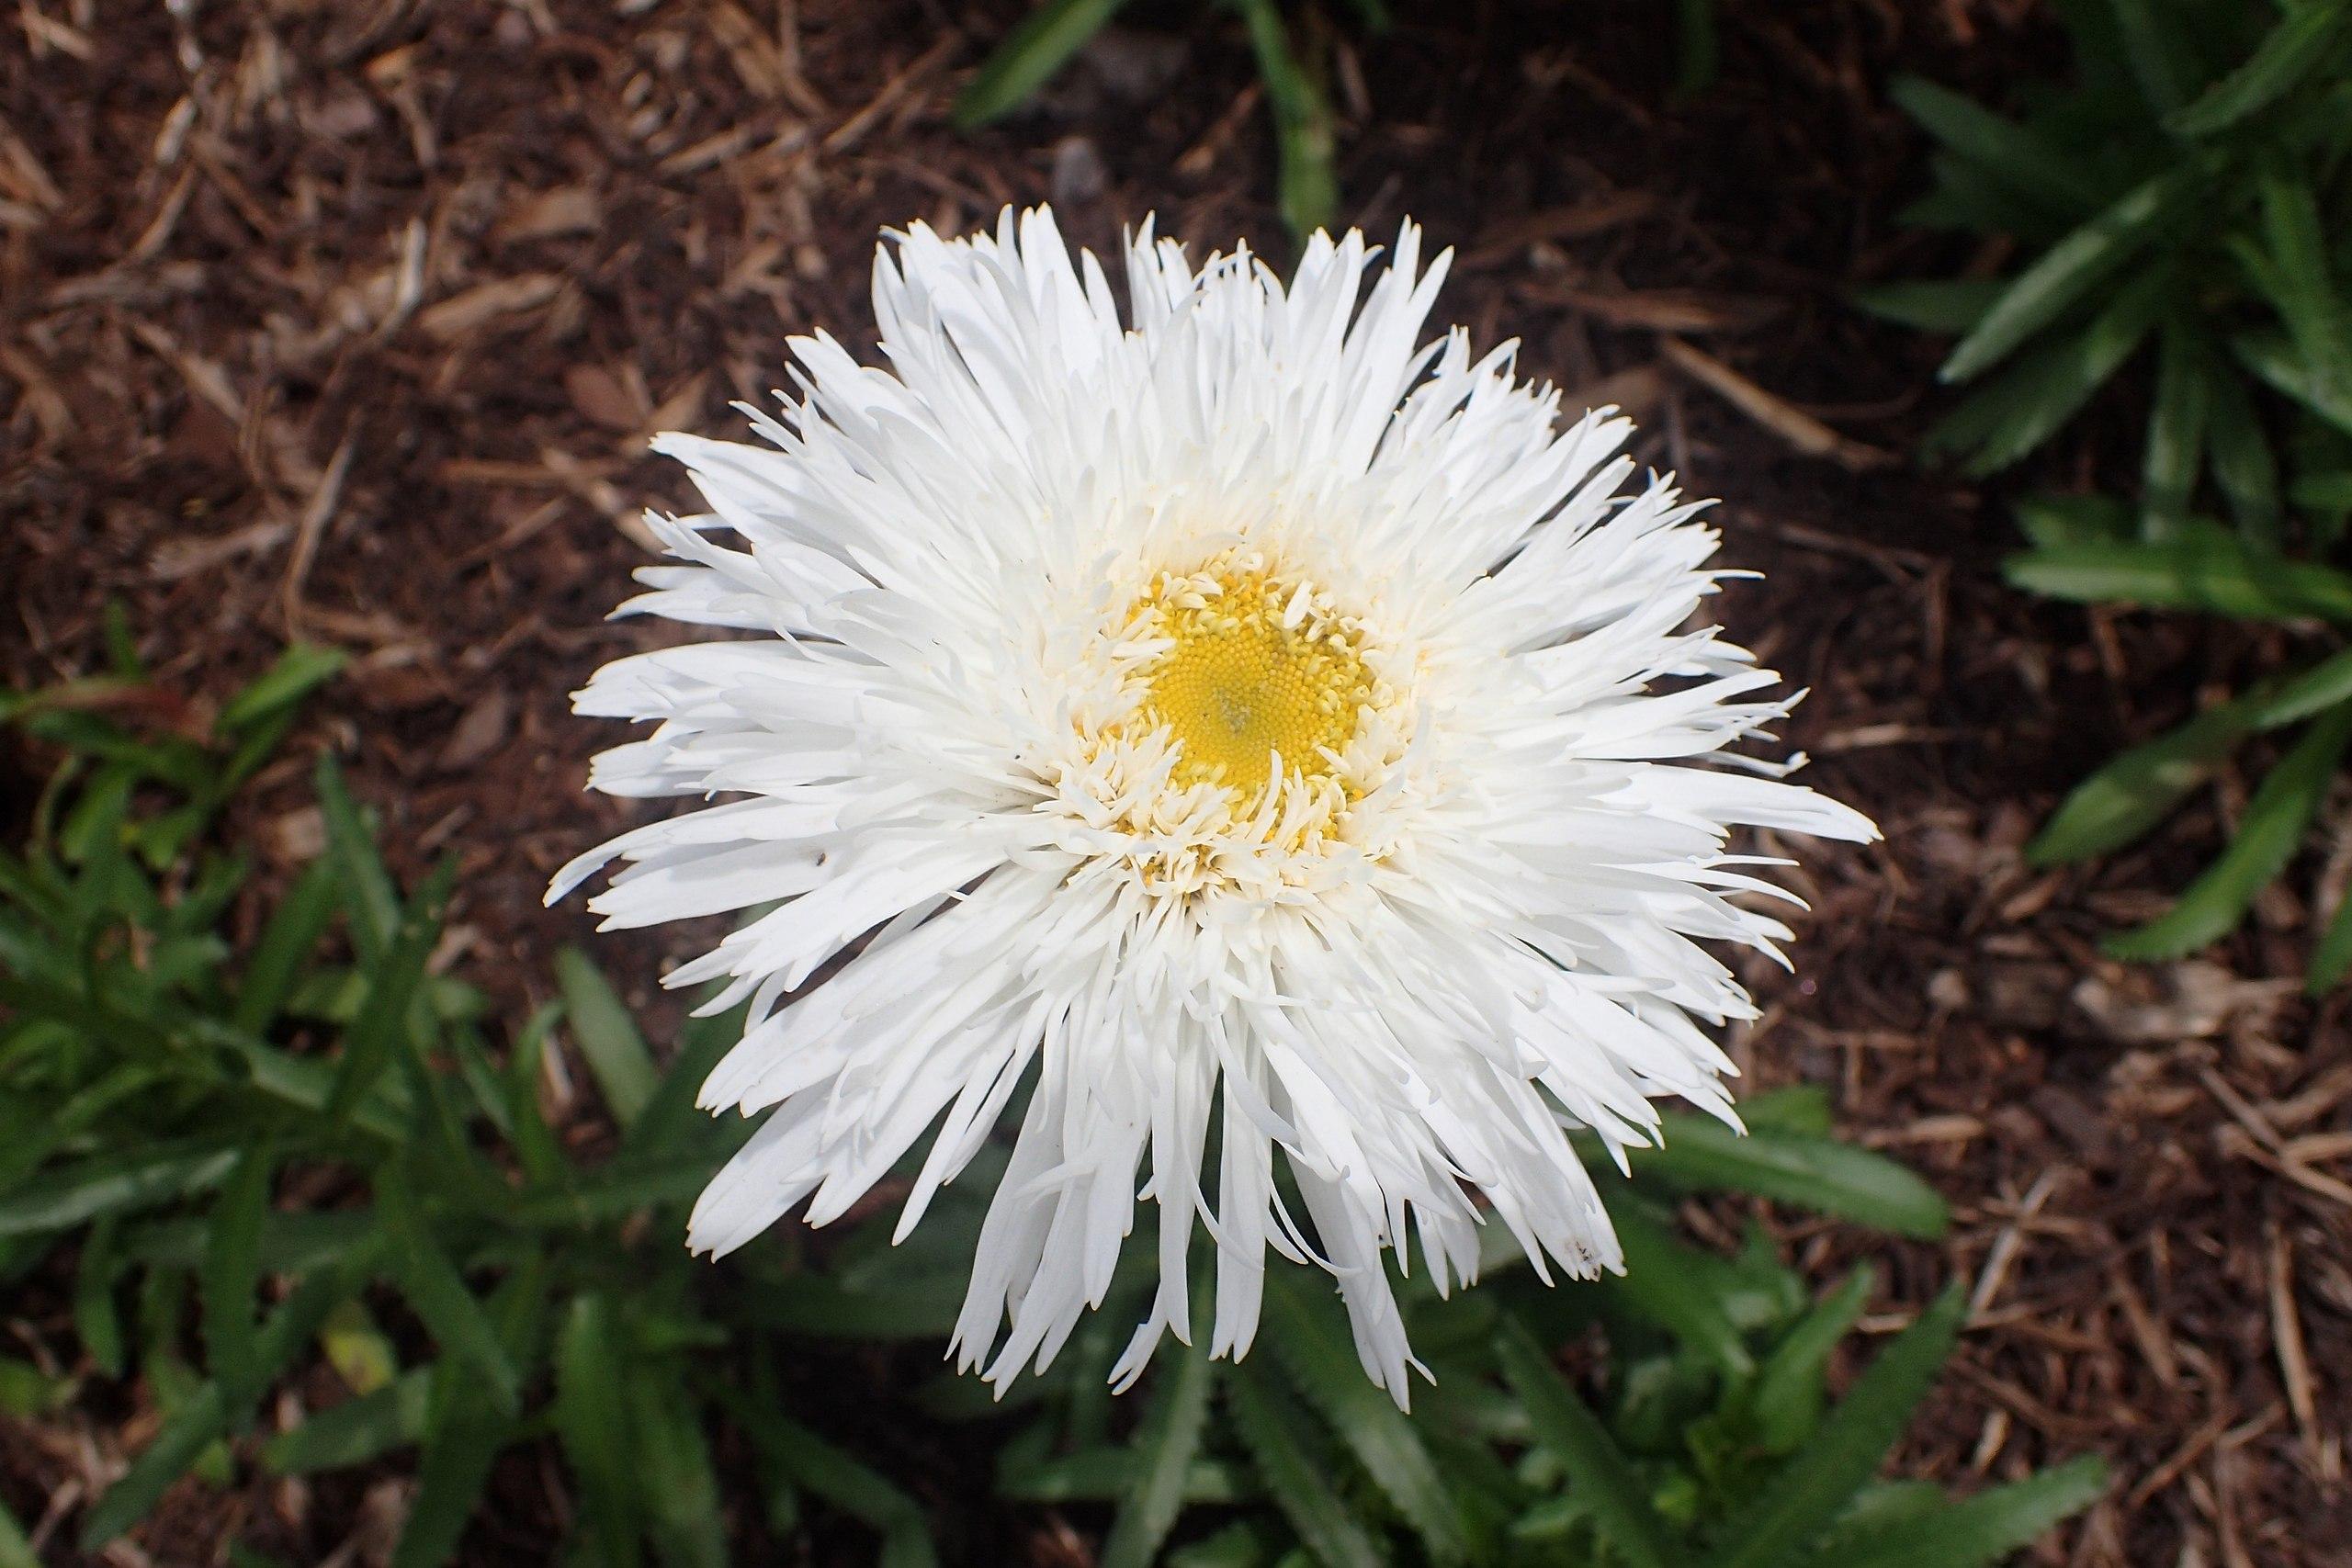 White flower with yellow center and dark-green leaves.